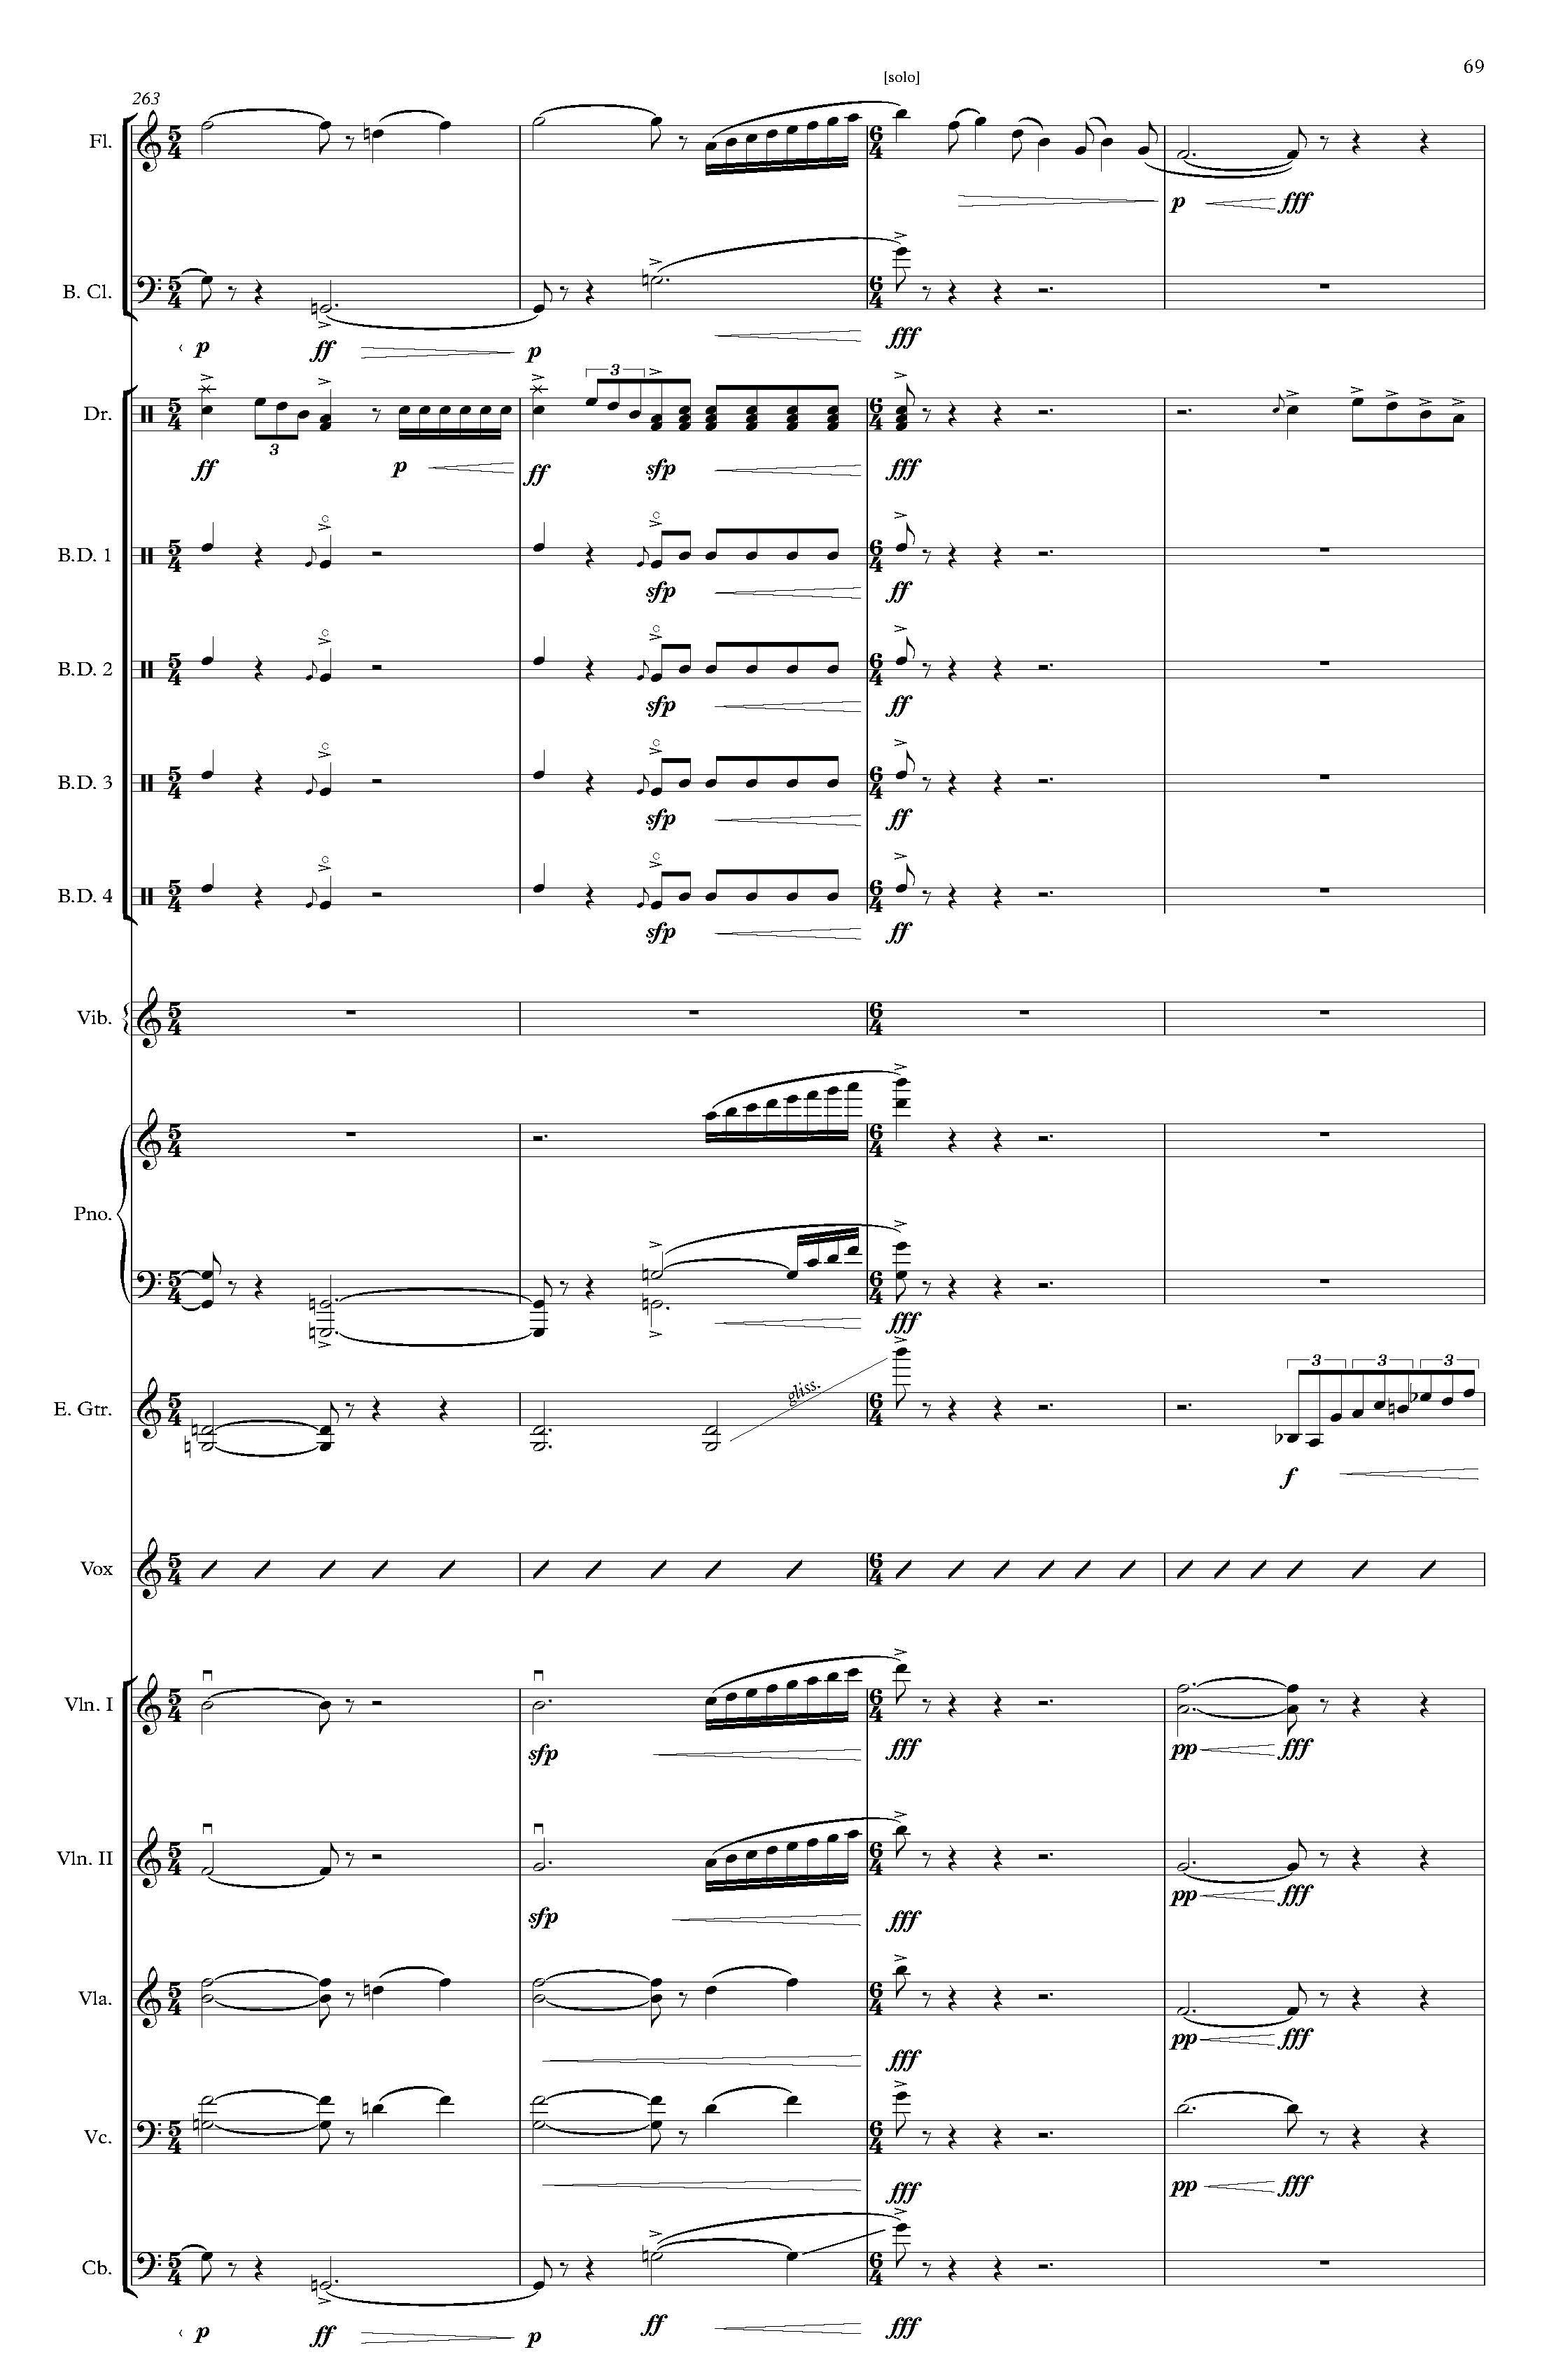 The Rembrandt of Avenue A - Complete Score_Page_75.jpg